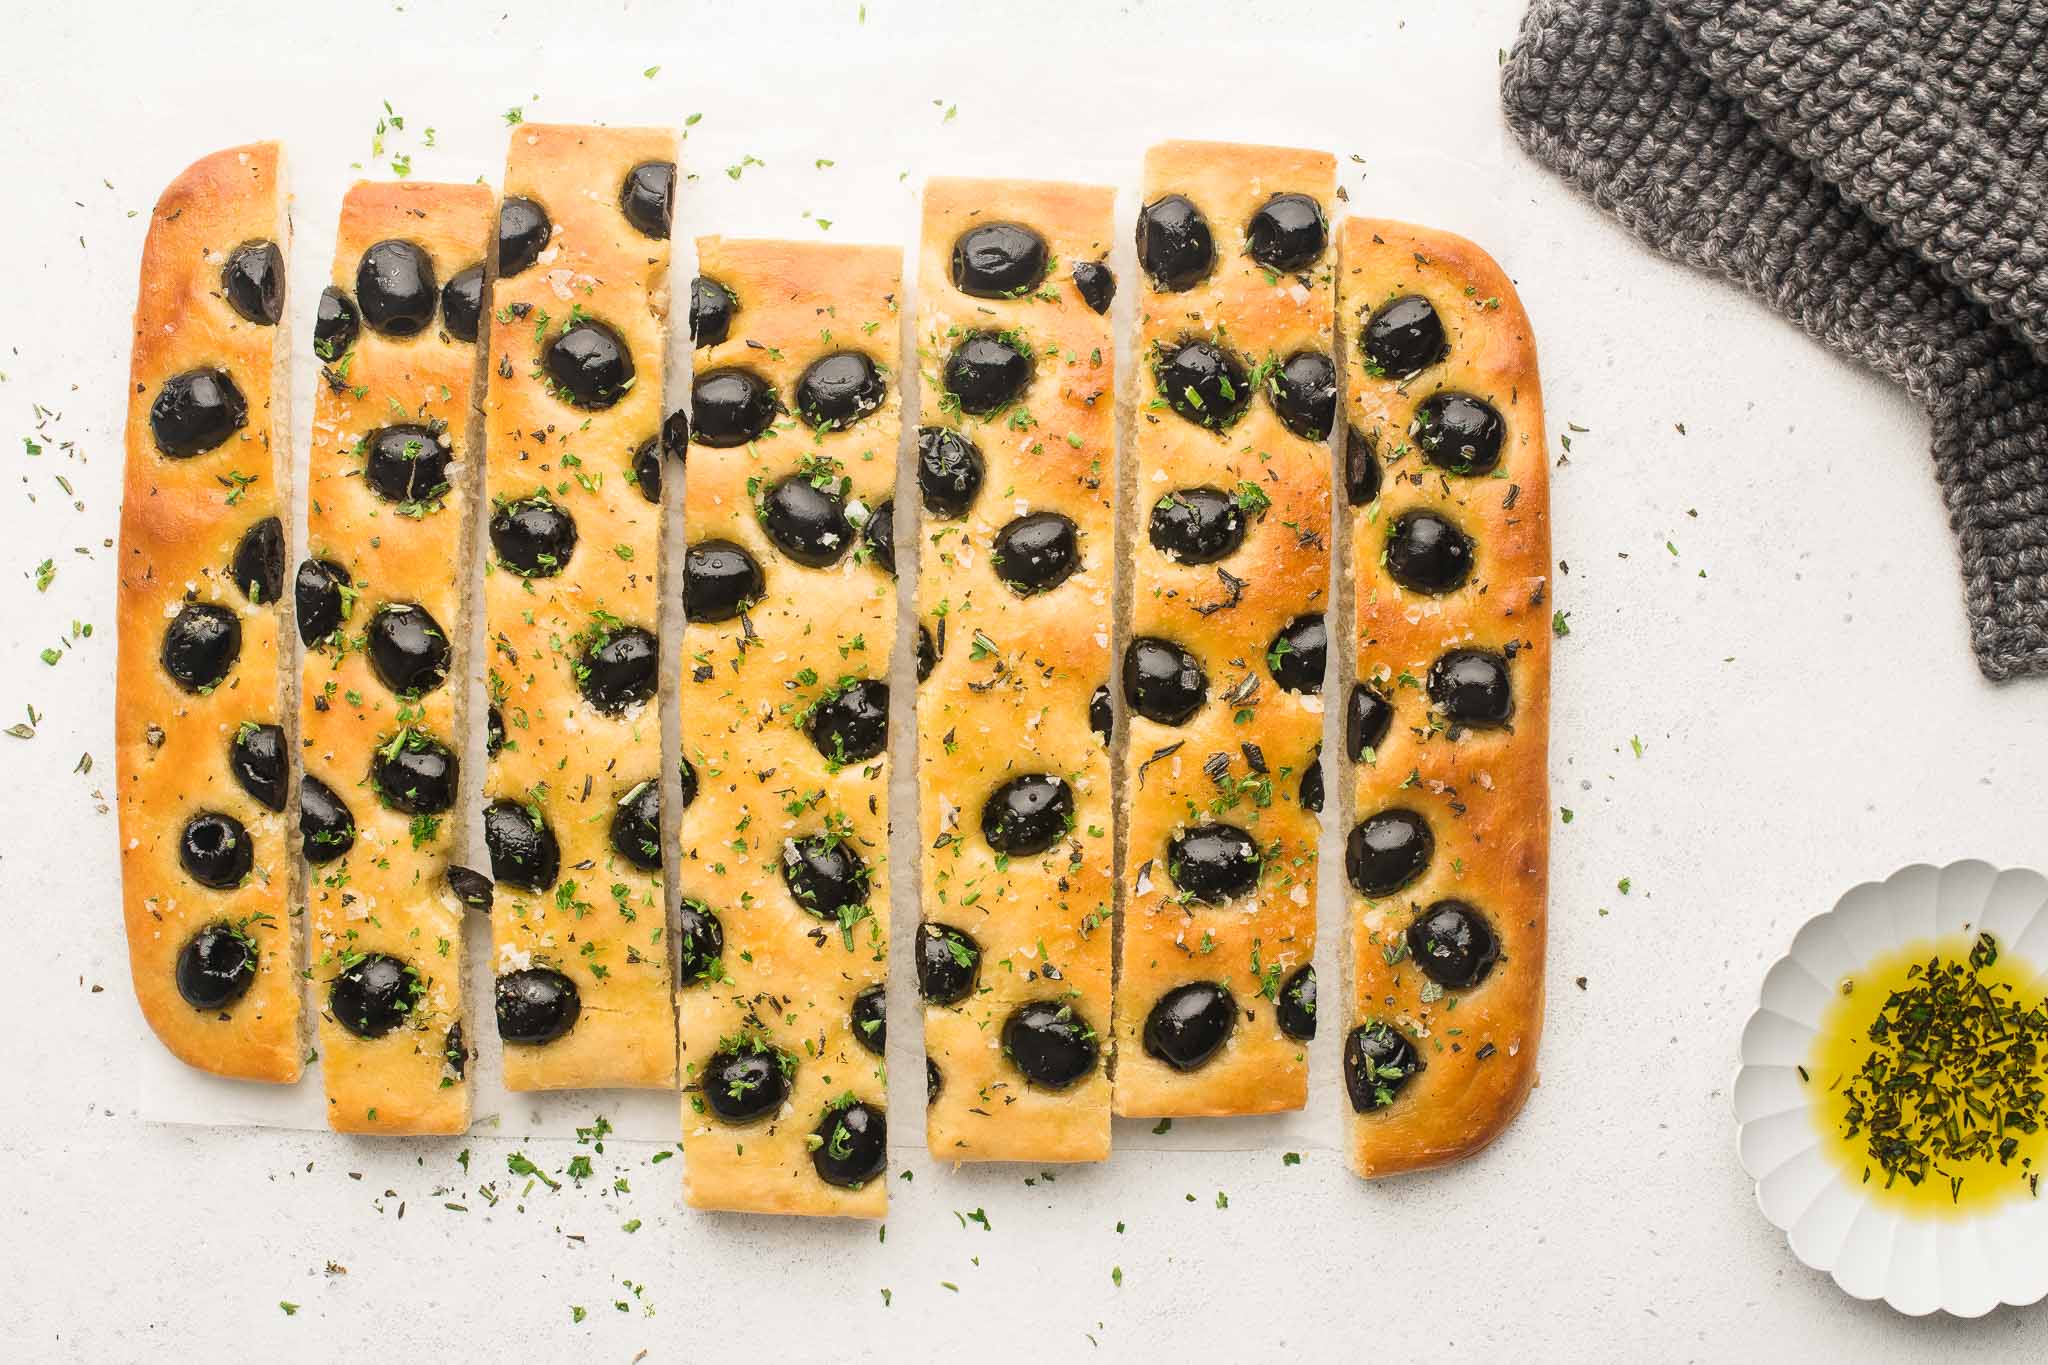 focaccia with herbs and olives sliced into lengths